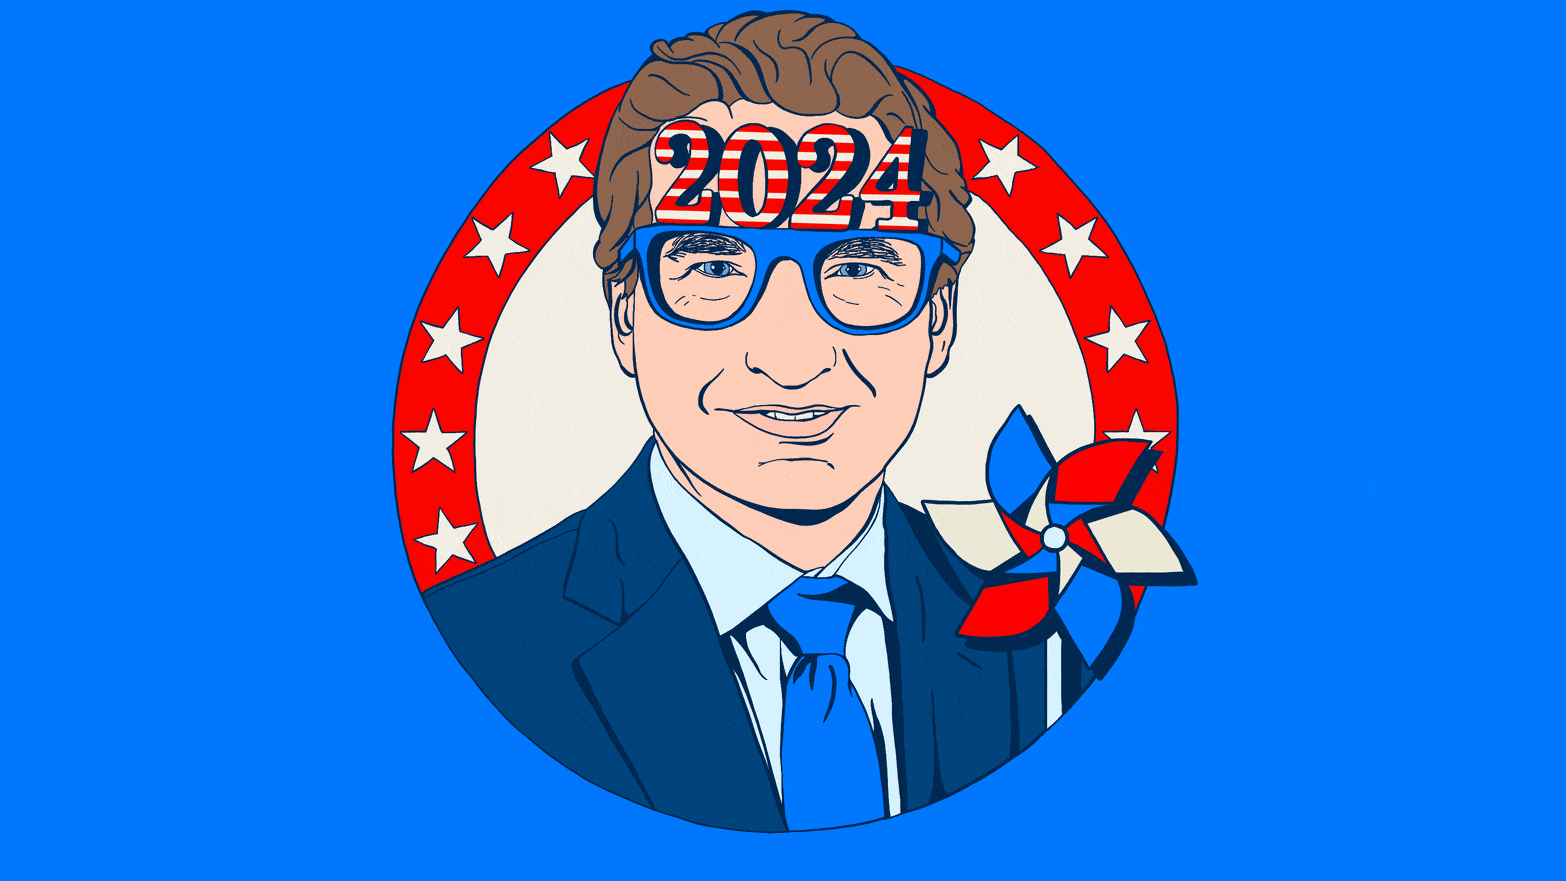 Illustrated gif of Dean Phillips wearing 2024 glasses and a pinwheel turning